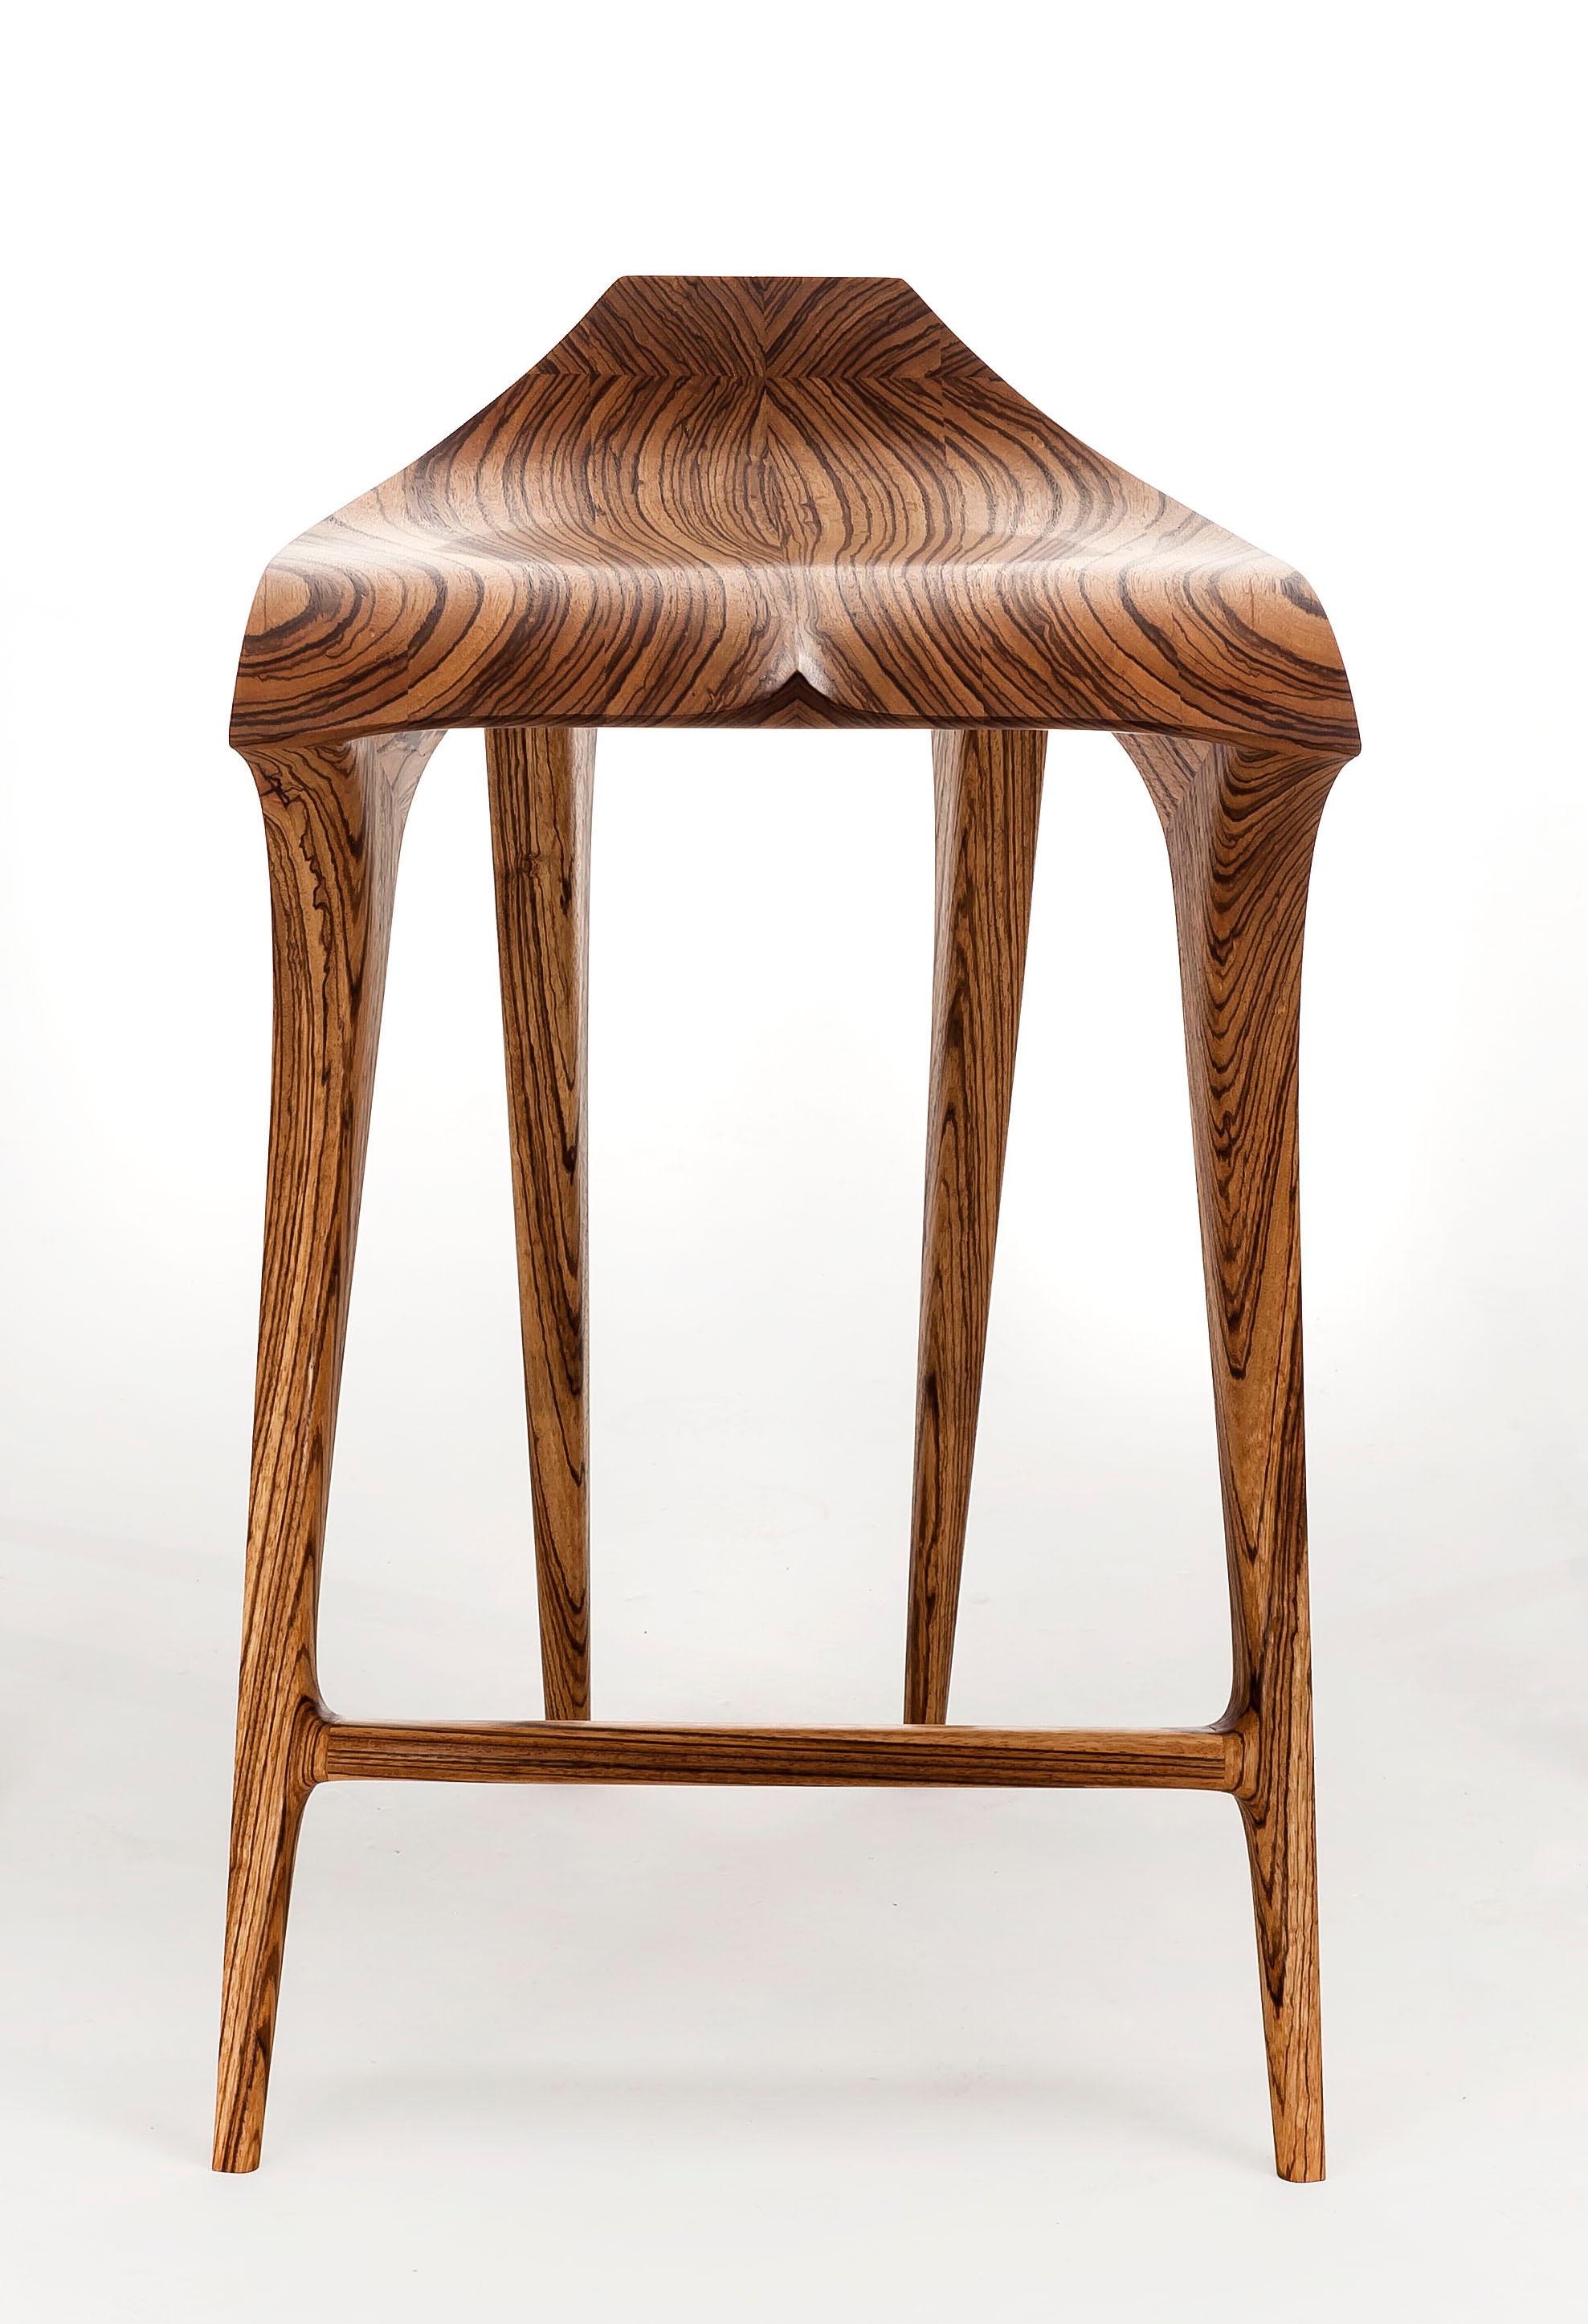 Hand-Crafted Contemporary Stool, Handcrafted, Solid Wood For Sale